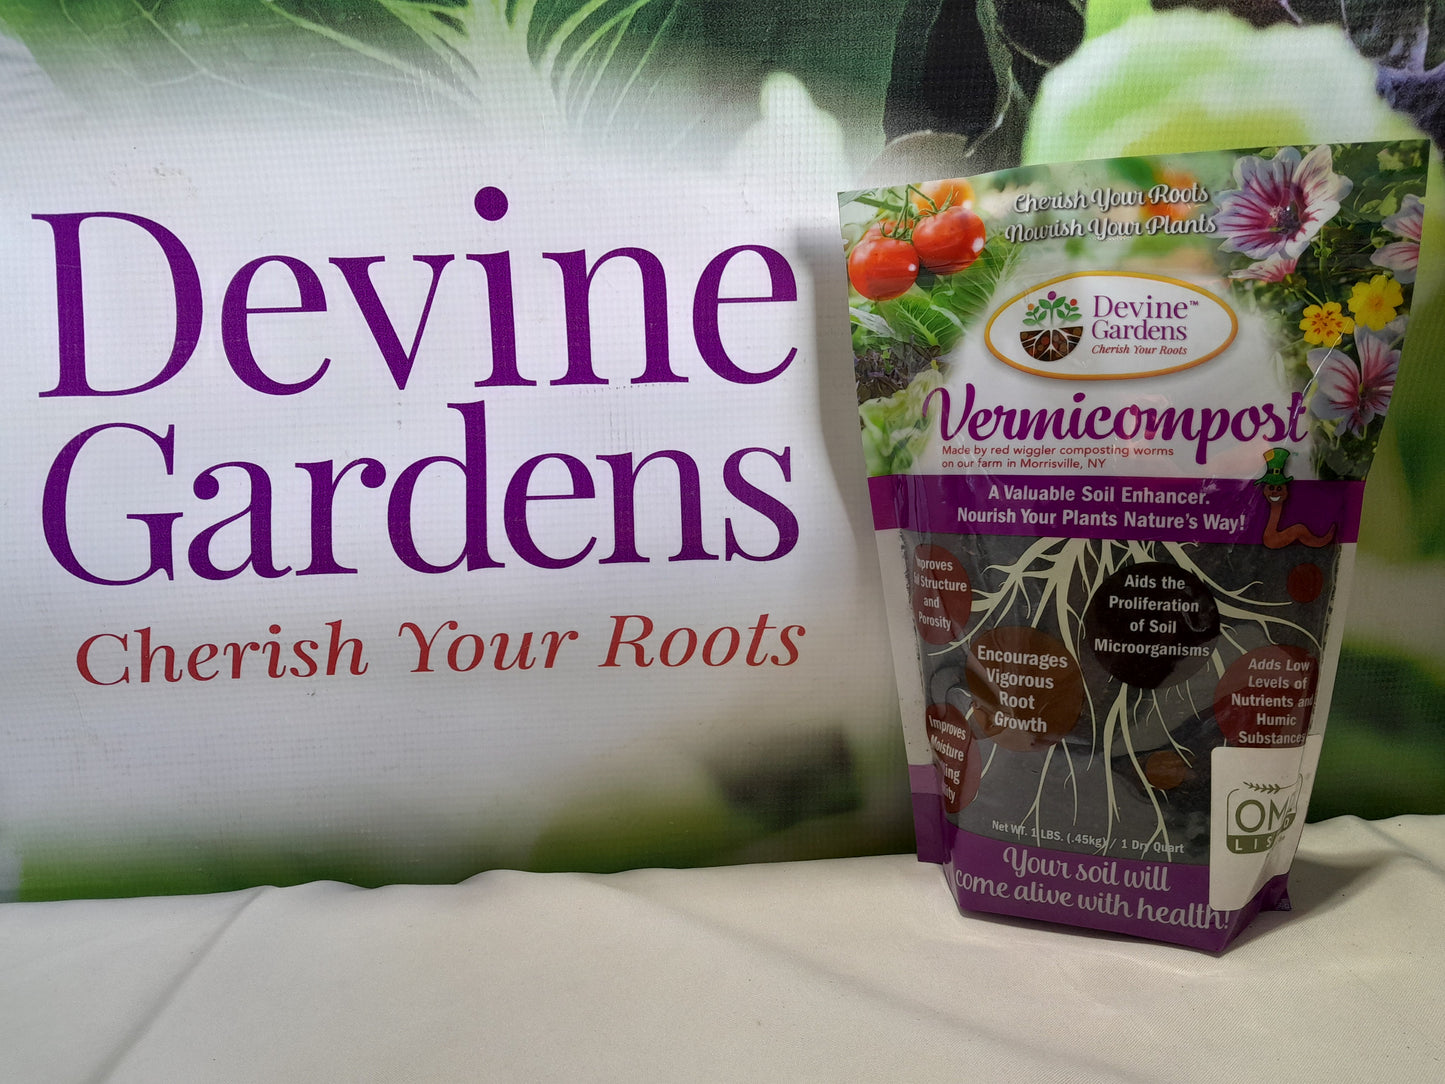 One quart bag of Devine Gardens vermicompost worm castings in front of logo